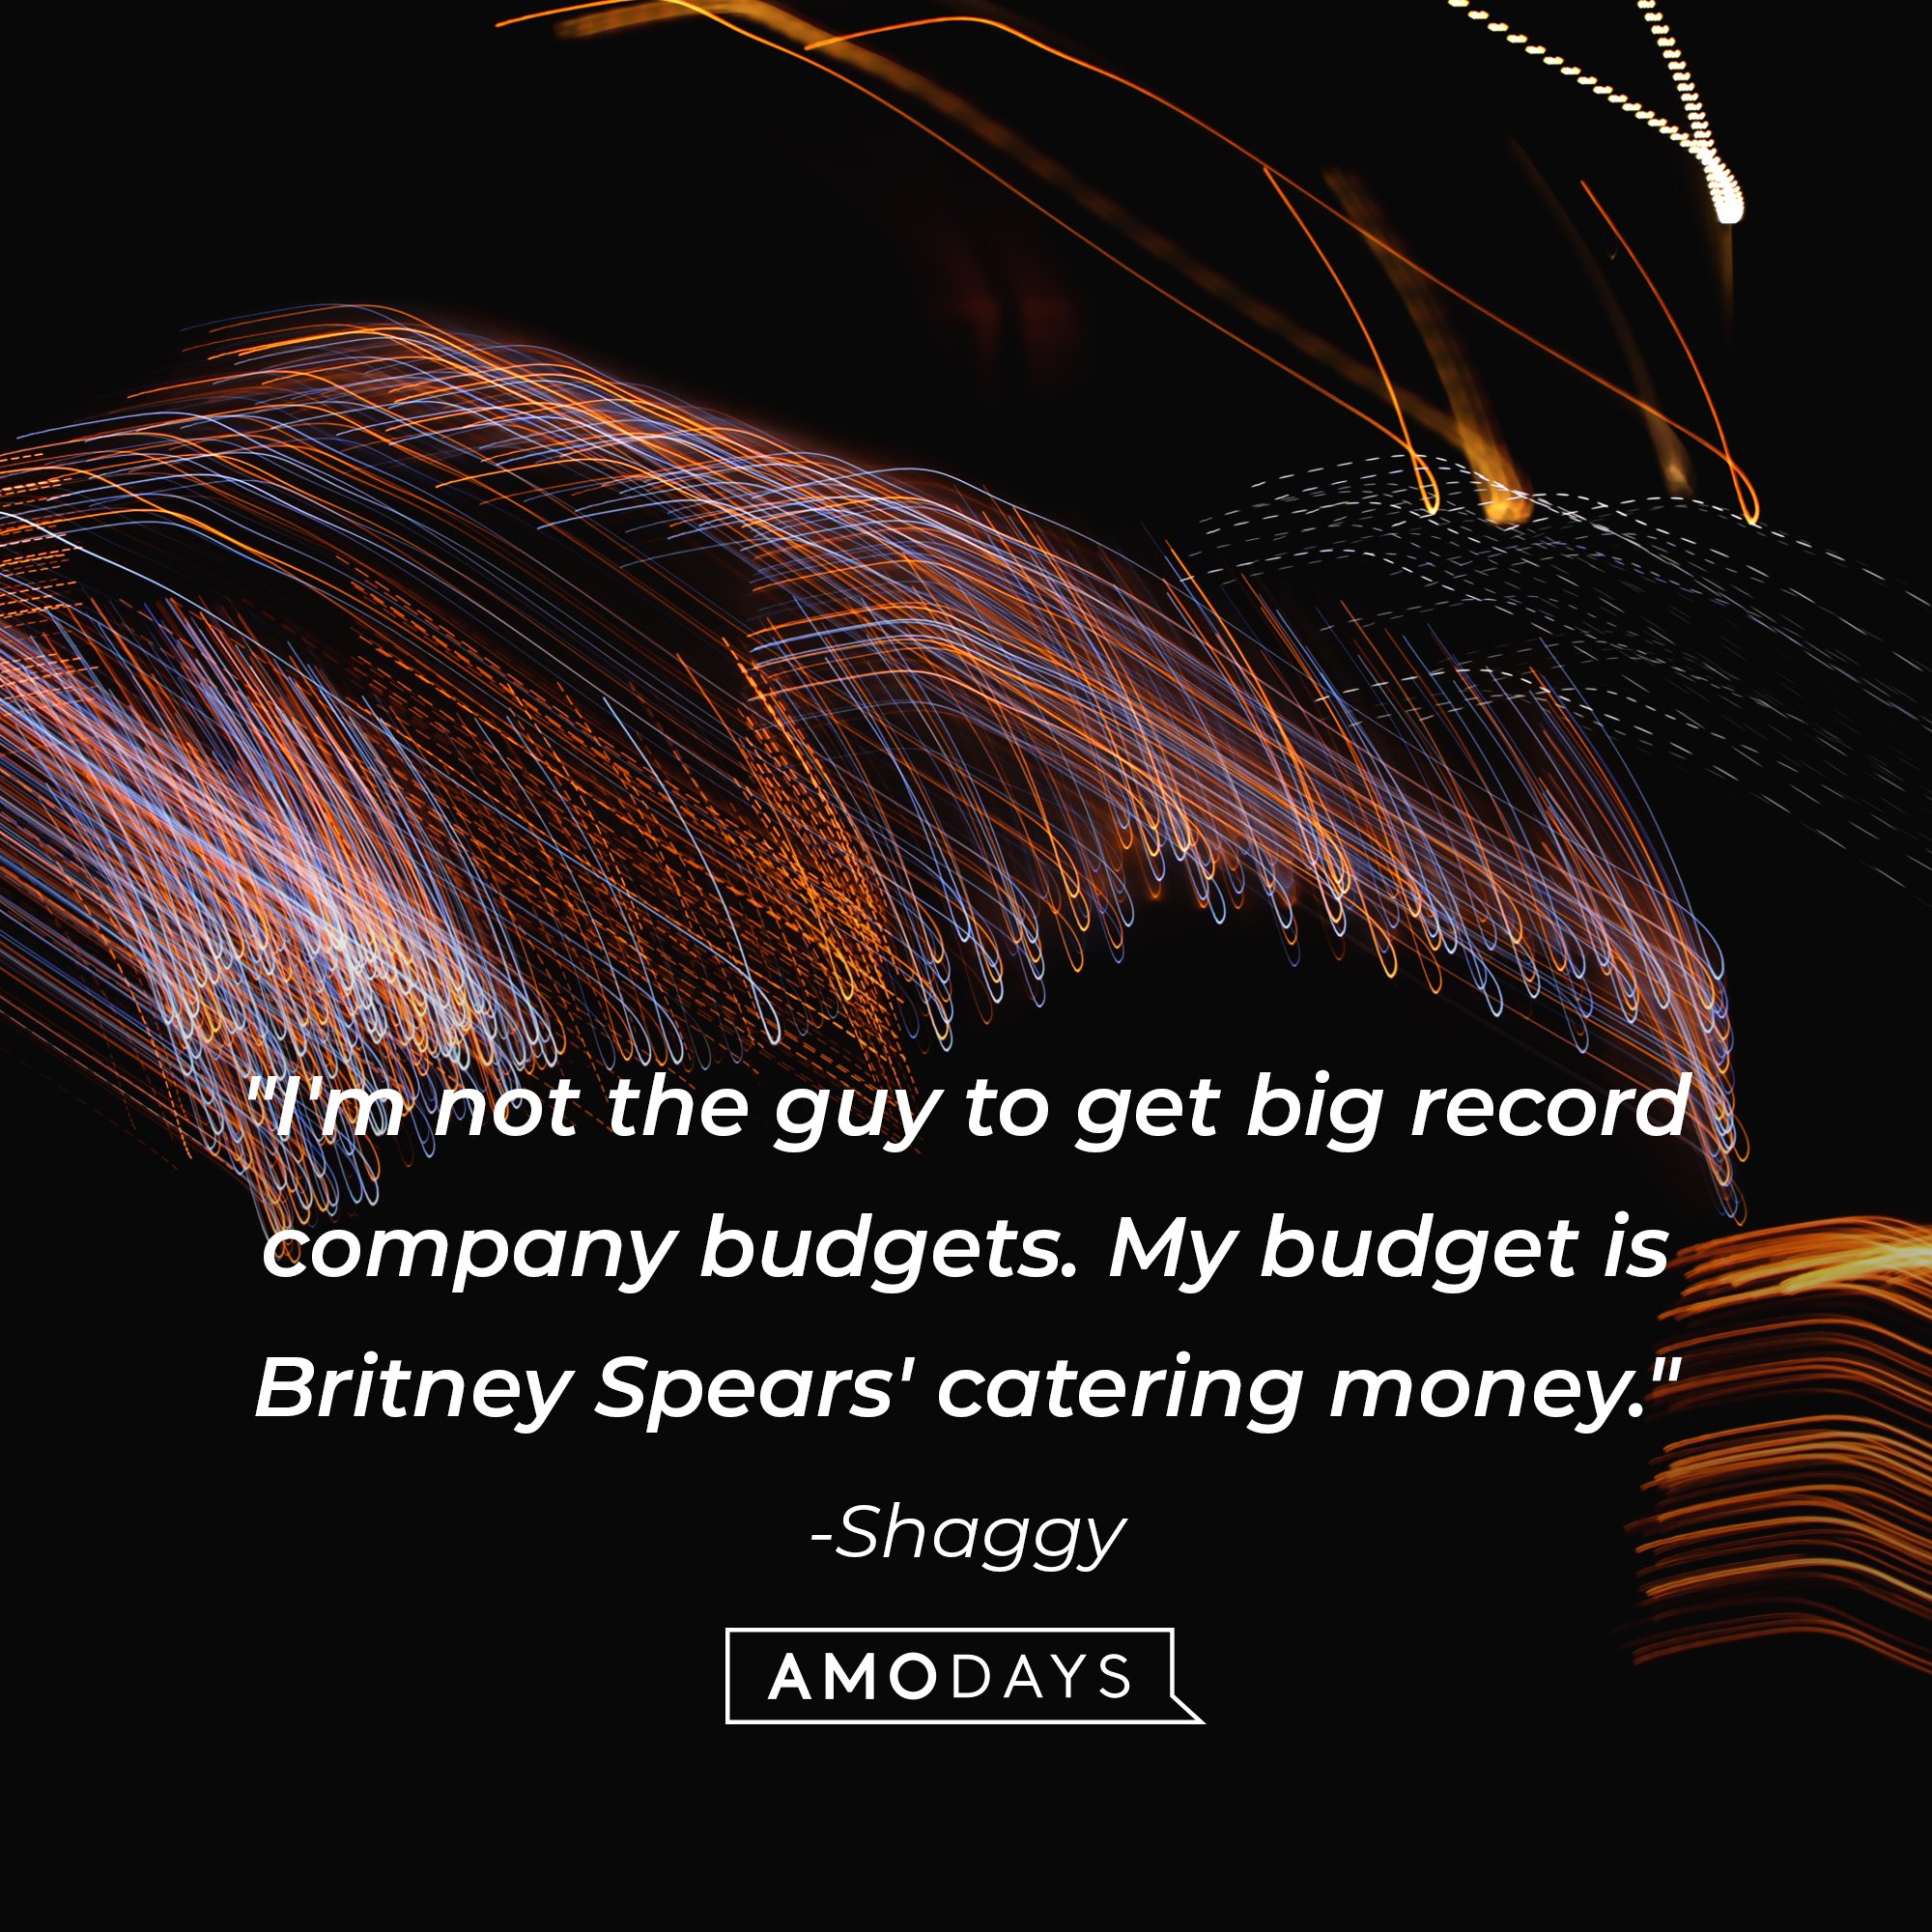 Shaggy's quote: "I'm not the guy to get big record company budgets. My budget is Britney Spears' catering money." | Image: AmoDays